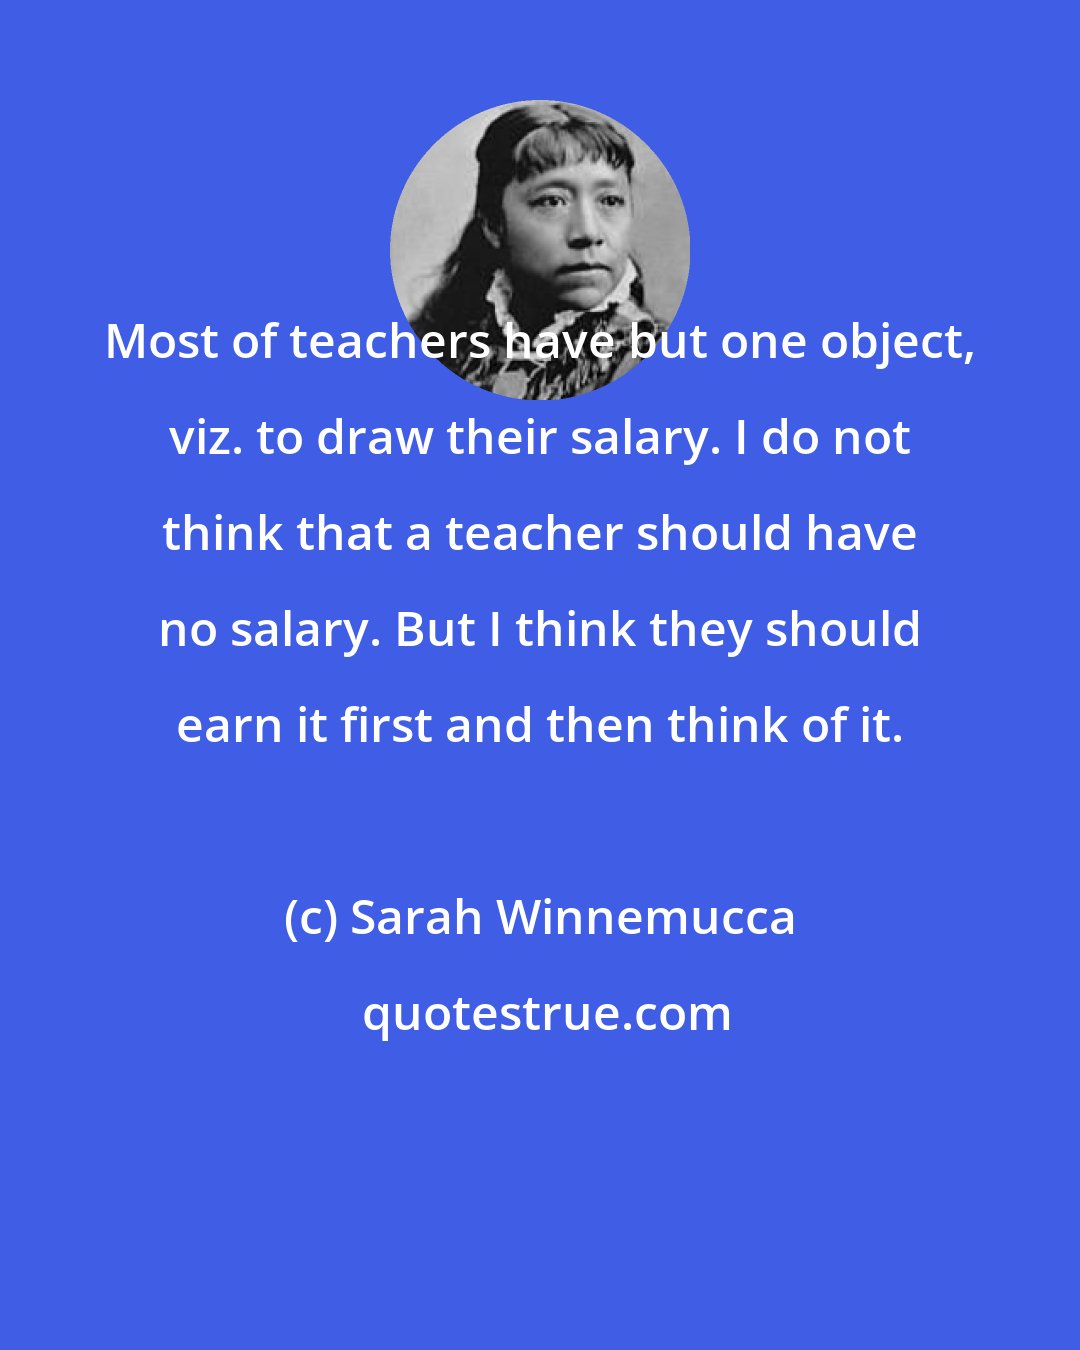 Sarah Winnemucca: Most of teachers have but one object, viz. to draw their salary. I do not think that a teacher should have no salary. But I think they should earn it first and then think of it.